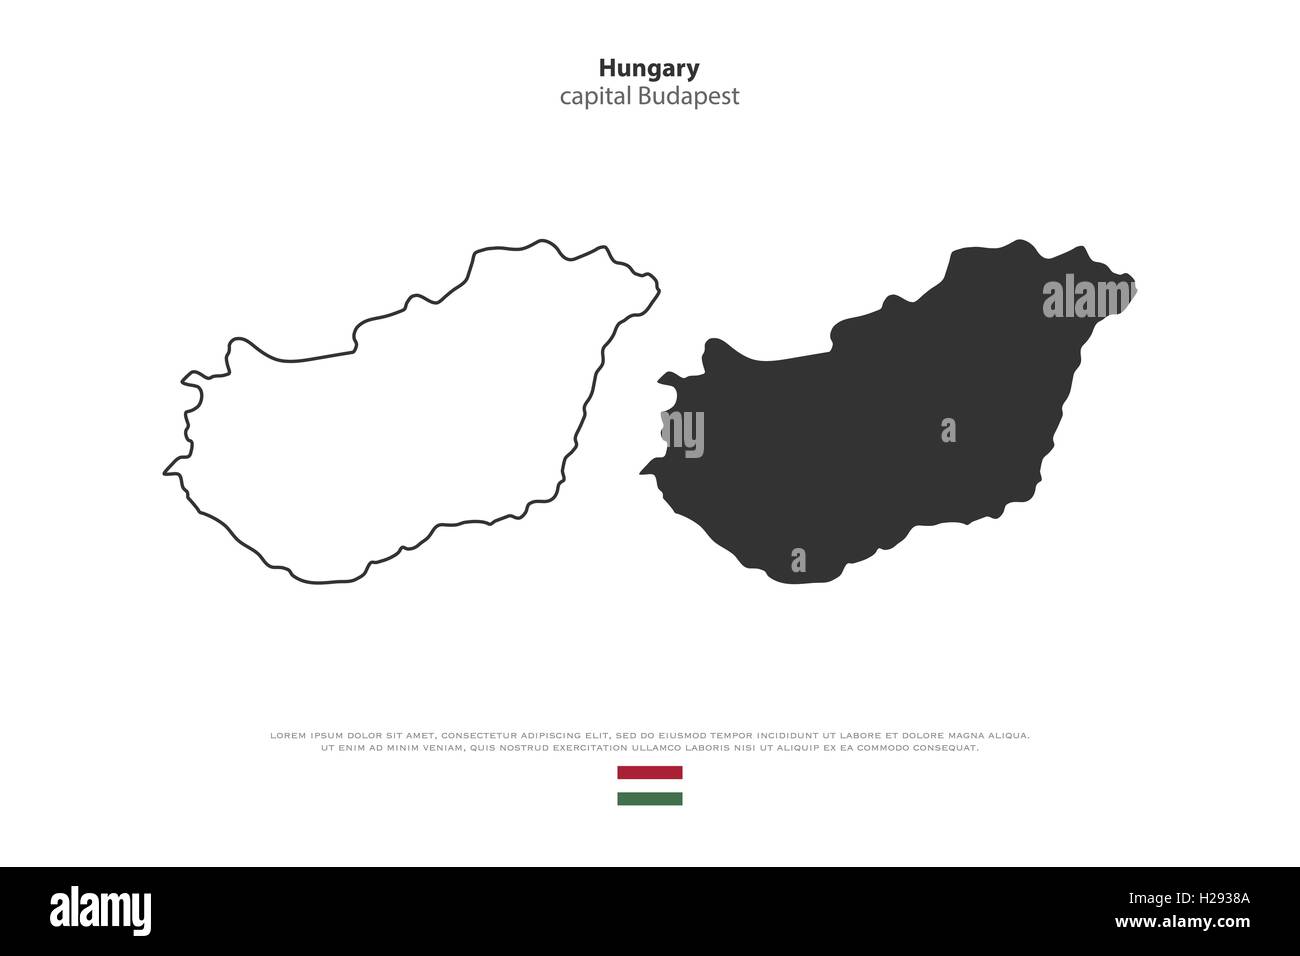 Republic of Hungary isolated map and official flag icons. vector Hungaian political maps illustration. Central Europe country ge Stock Vector